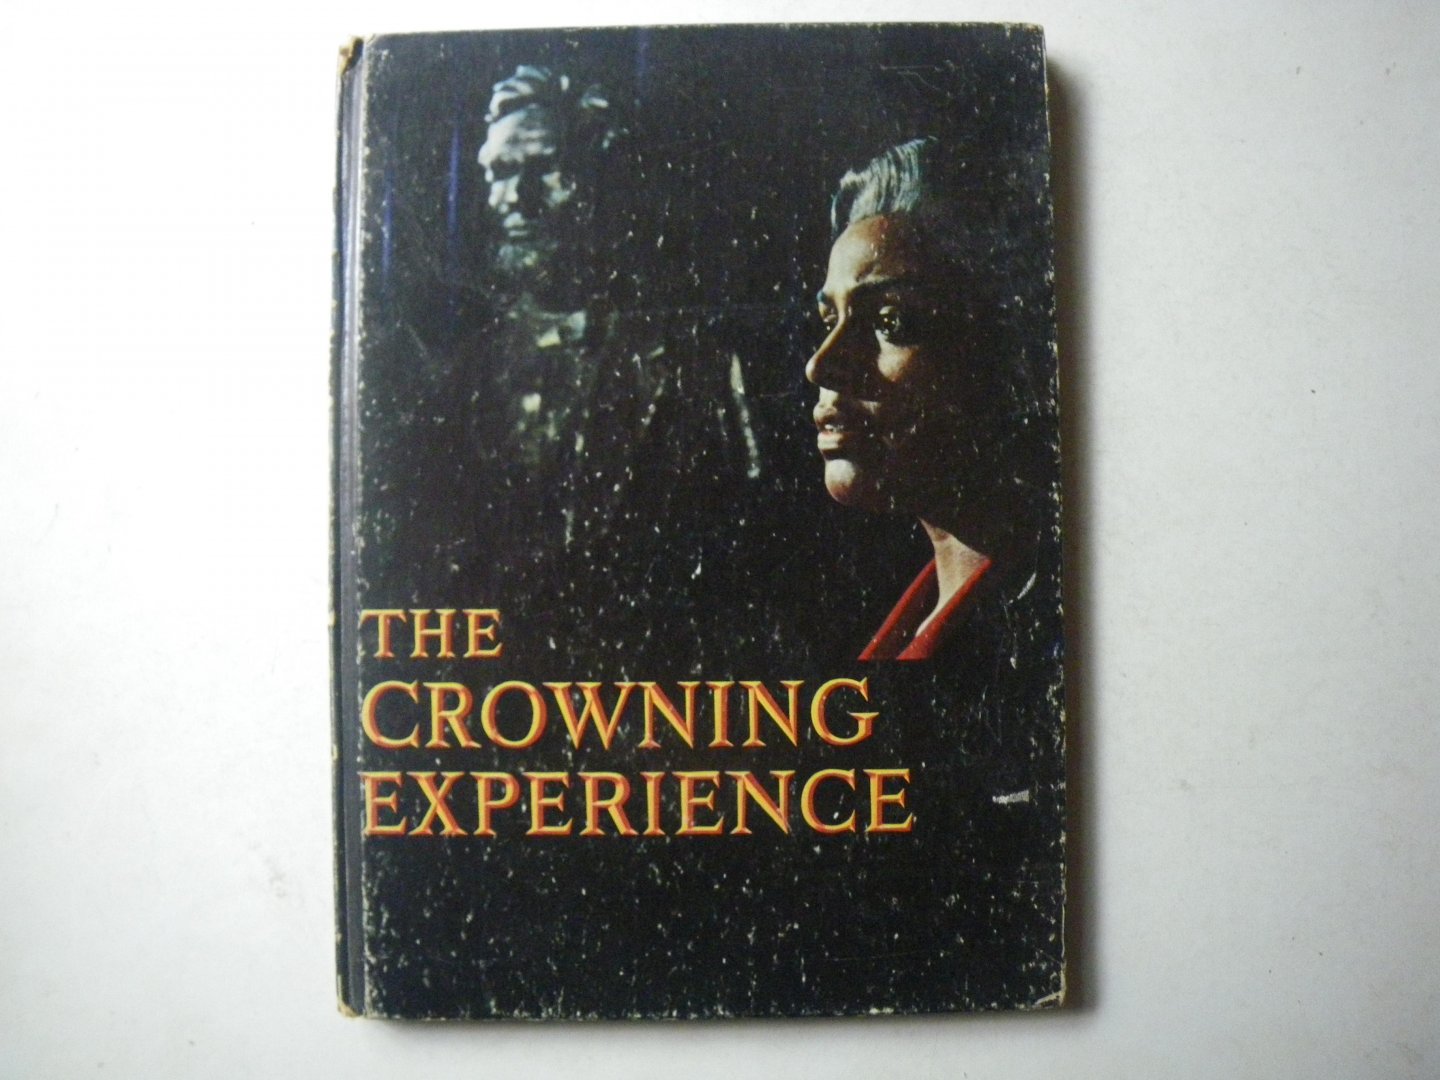 Hardiman, James W; EDITOR - The Crowning Experience : Book of the Film